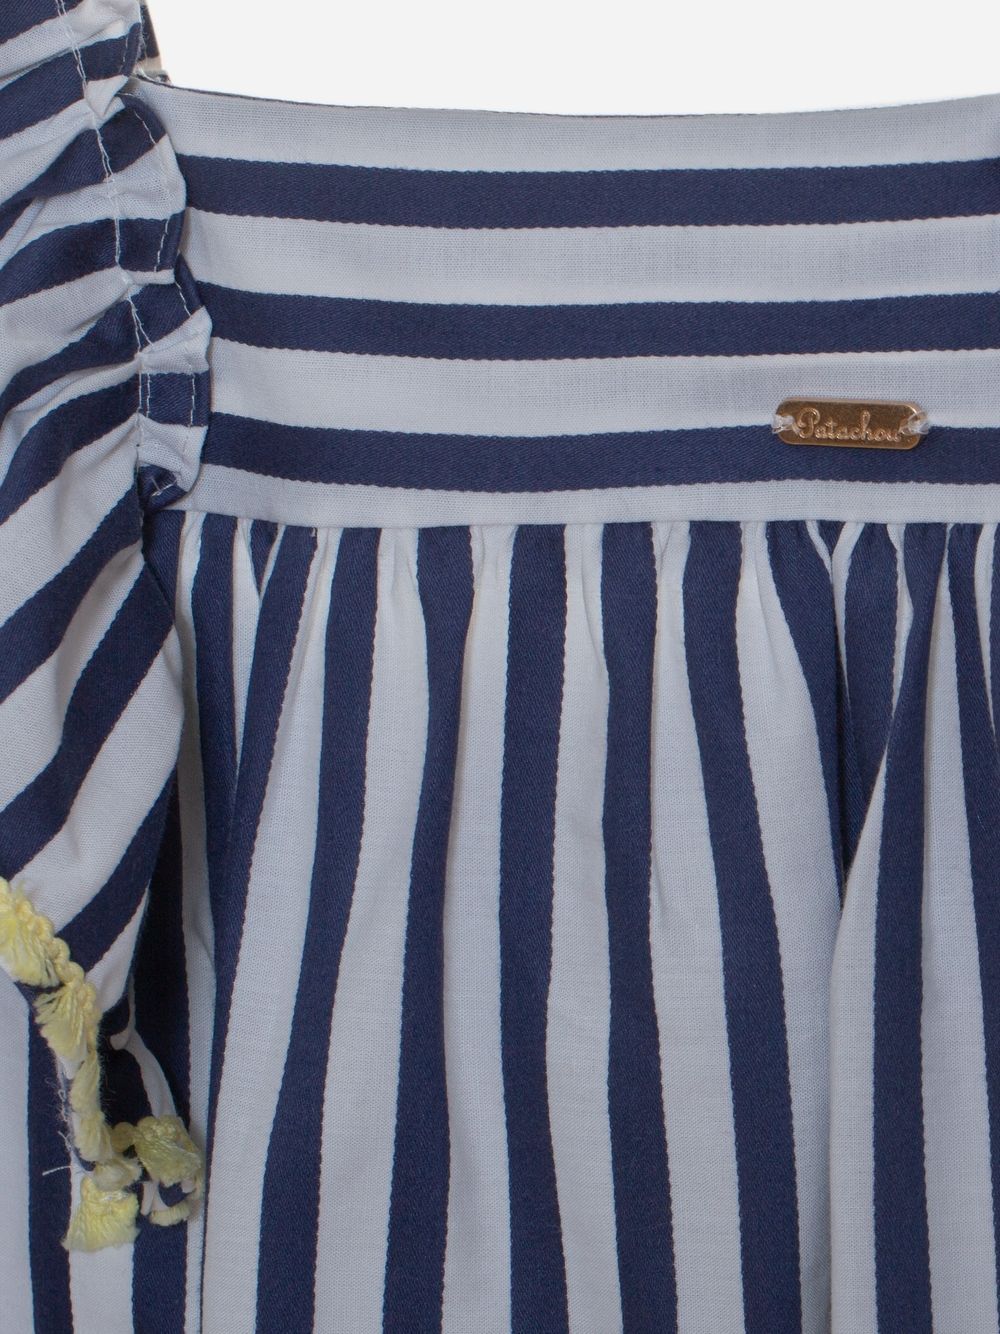 Blue and white striped girls dress